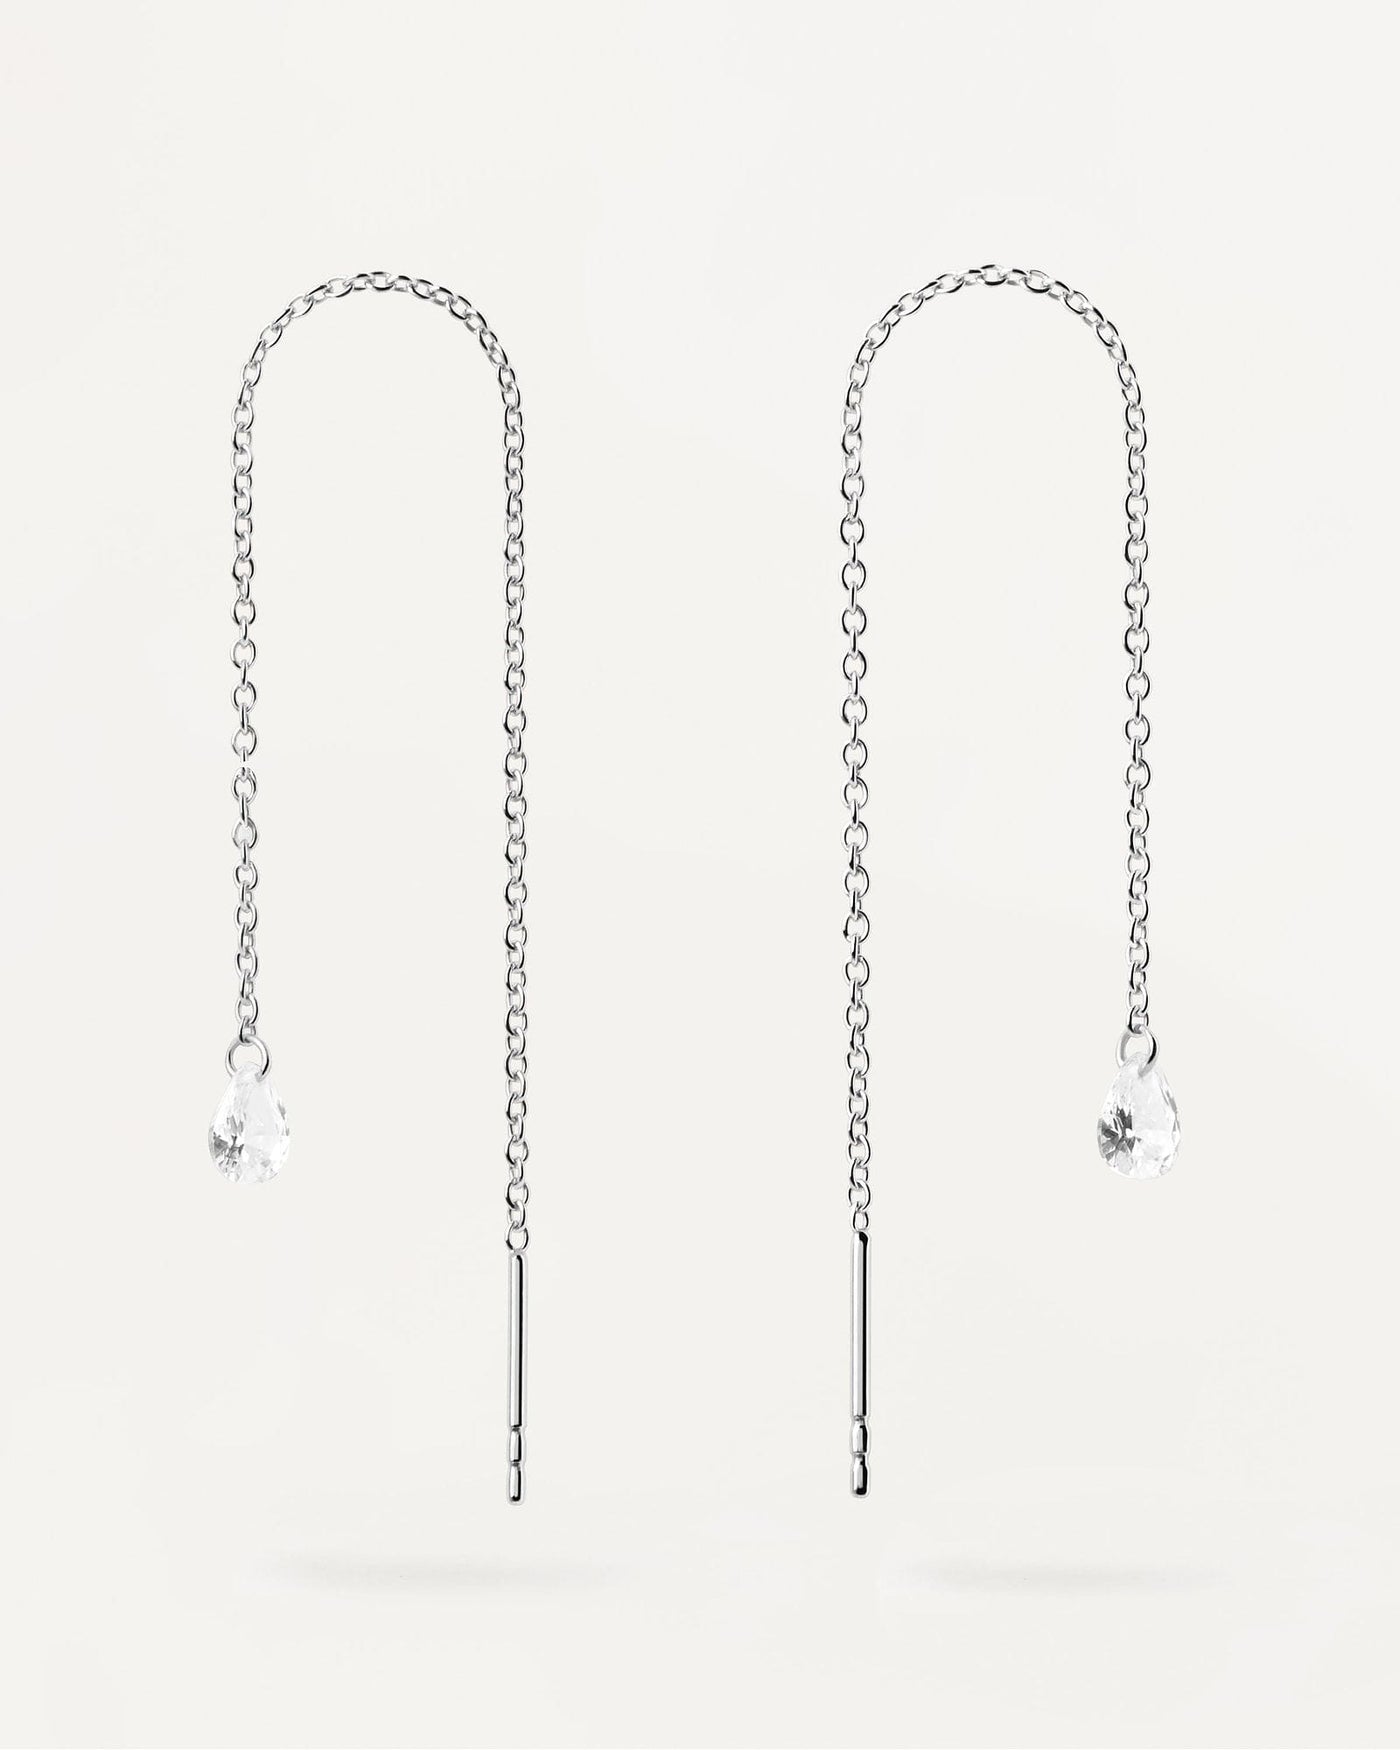 2024 Selection | Waterfall drop silver Earrings. Long delicate earrings in sterling silver with drop zirconia pendant. Get the latest arrival from PDPAOLA. Place your order safely and get this Best Seller. Free Shipping.